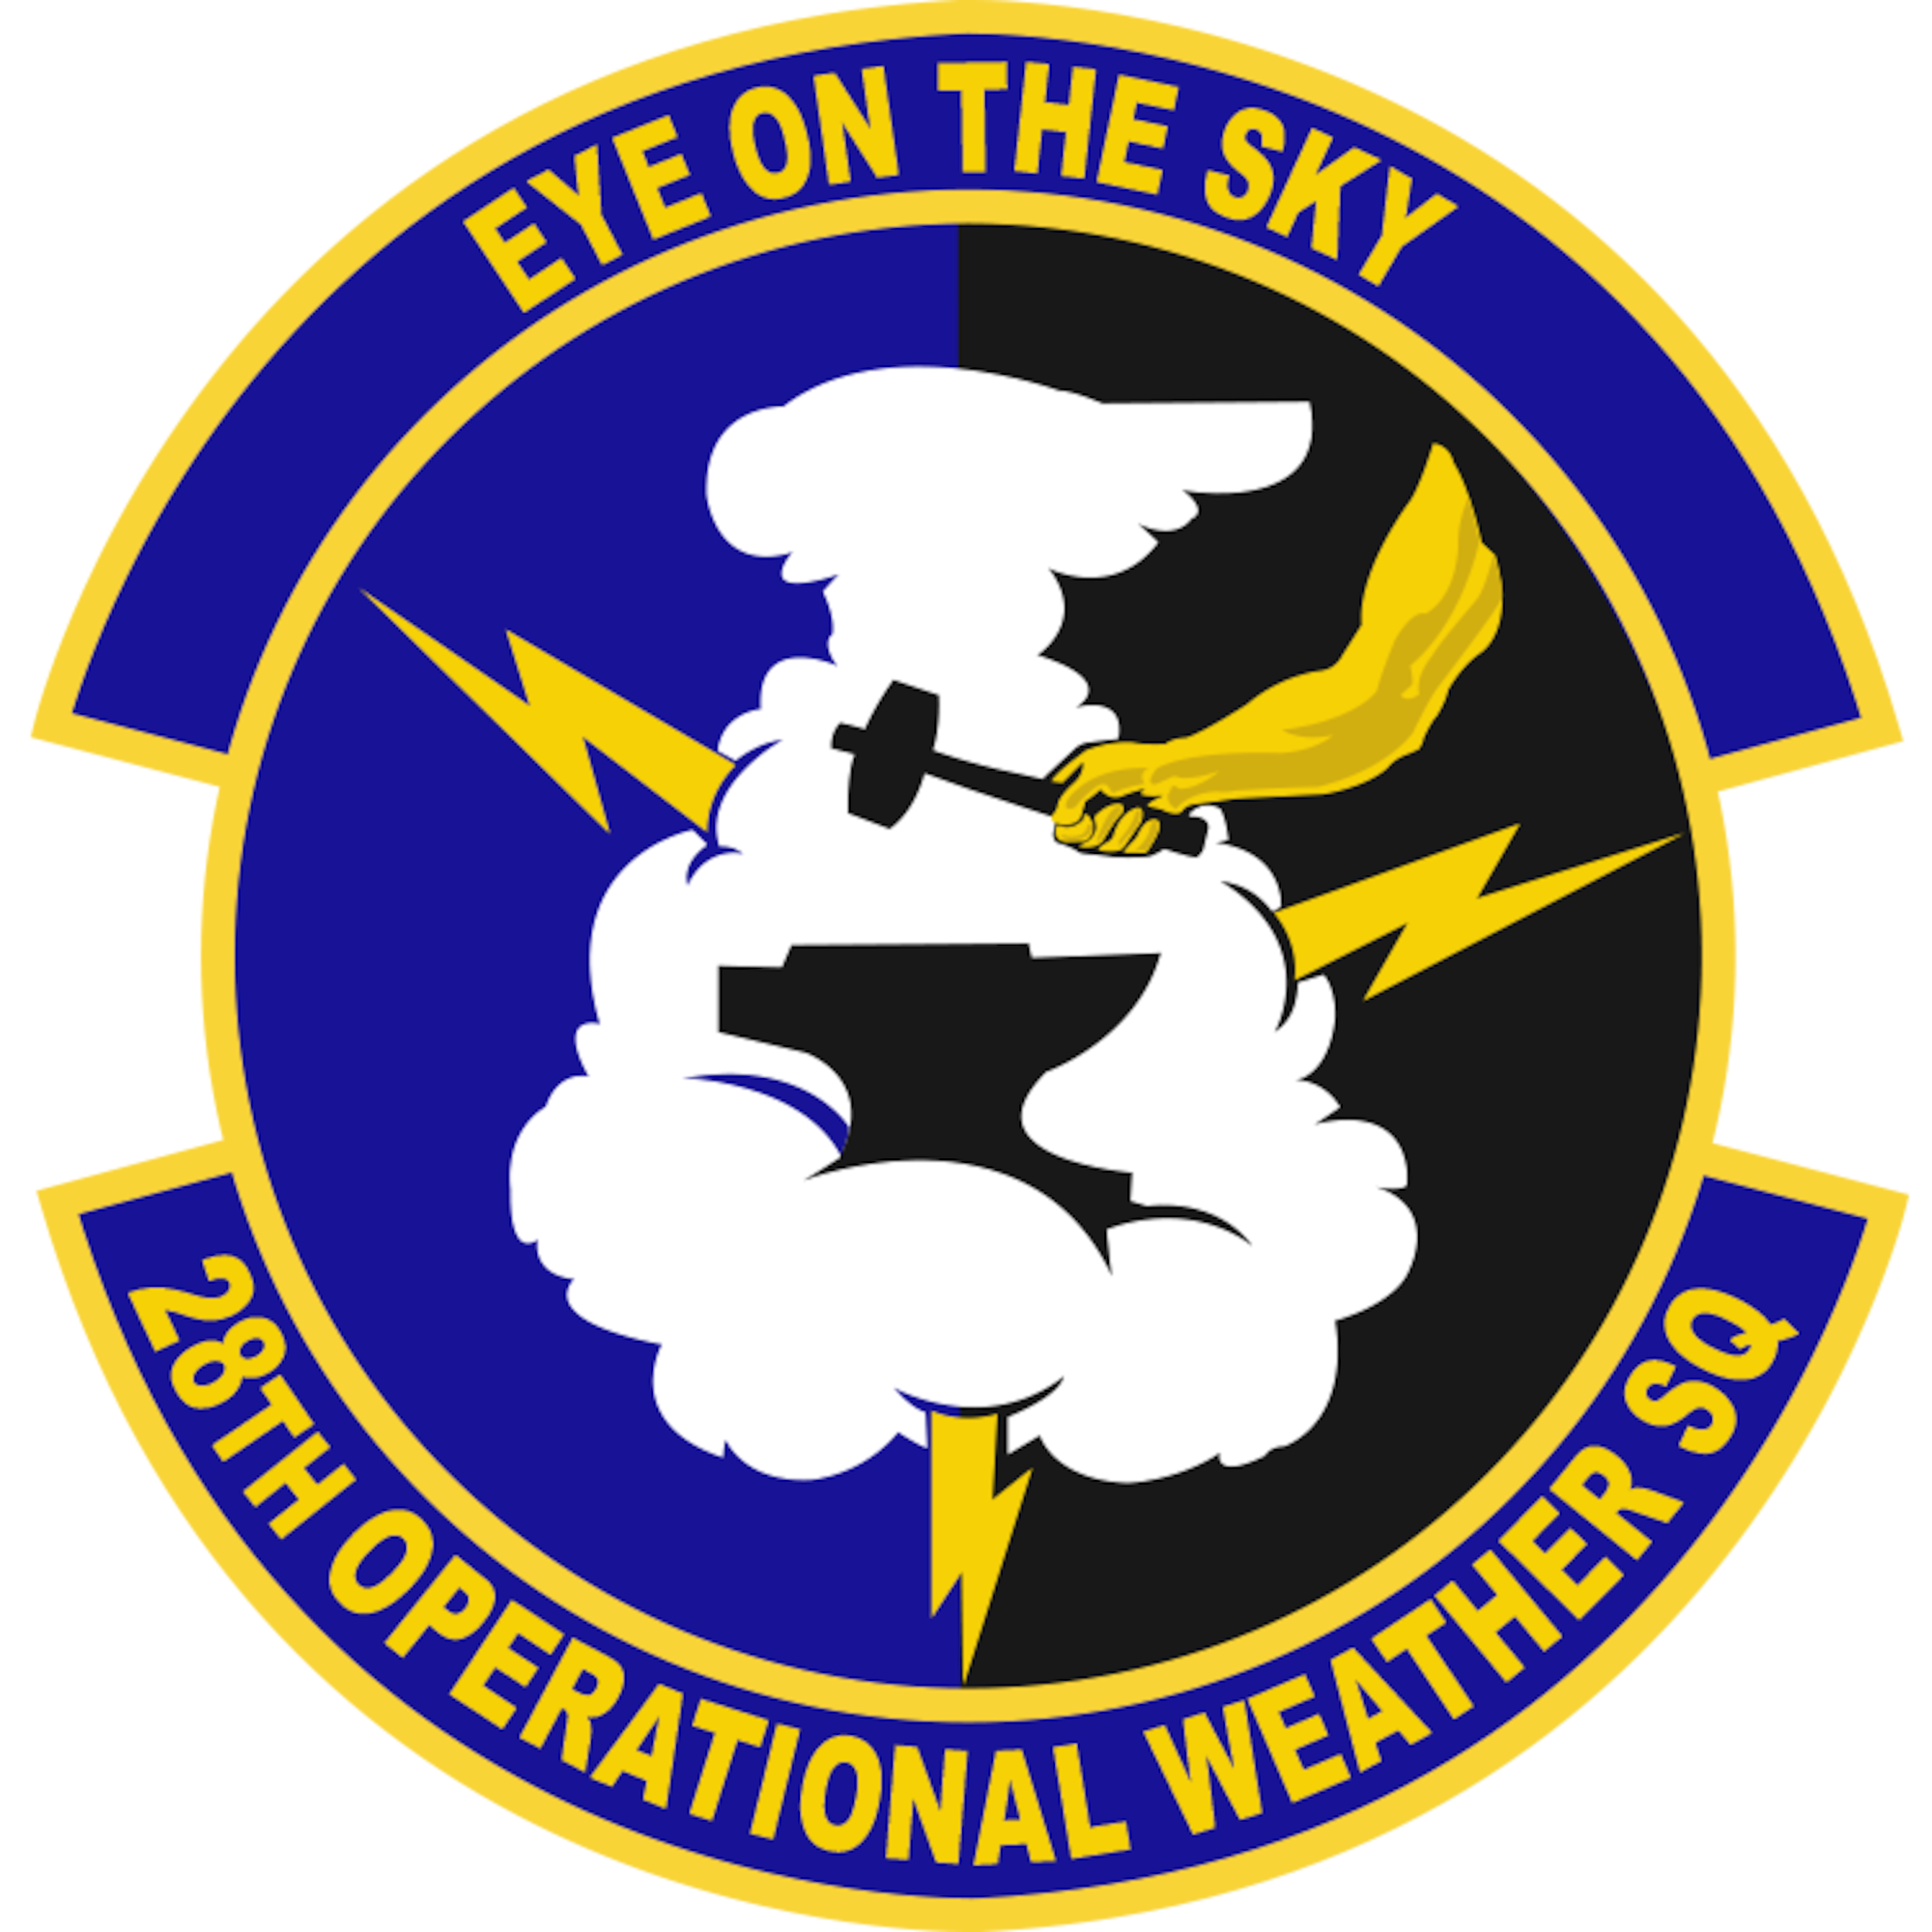 Official shield for 28th Operational Weather Squadron